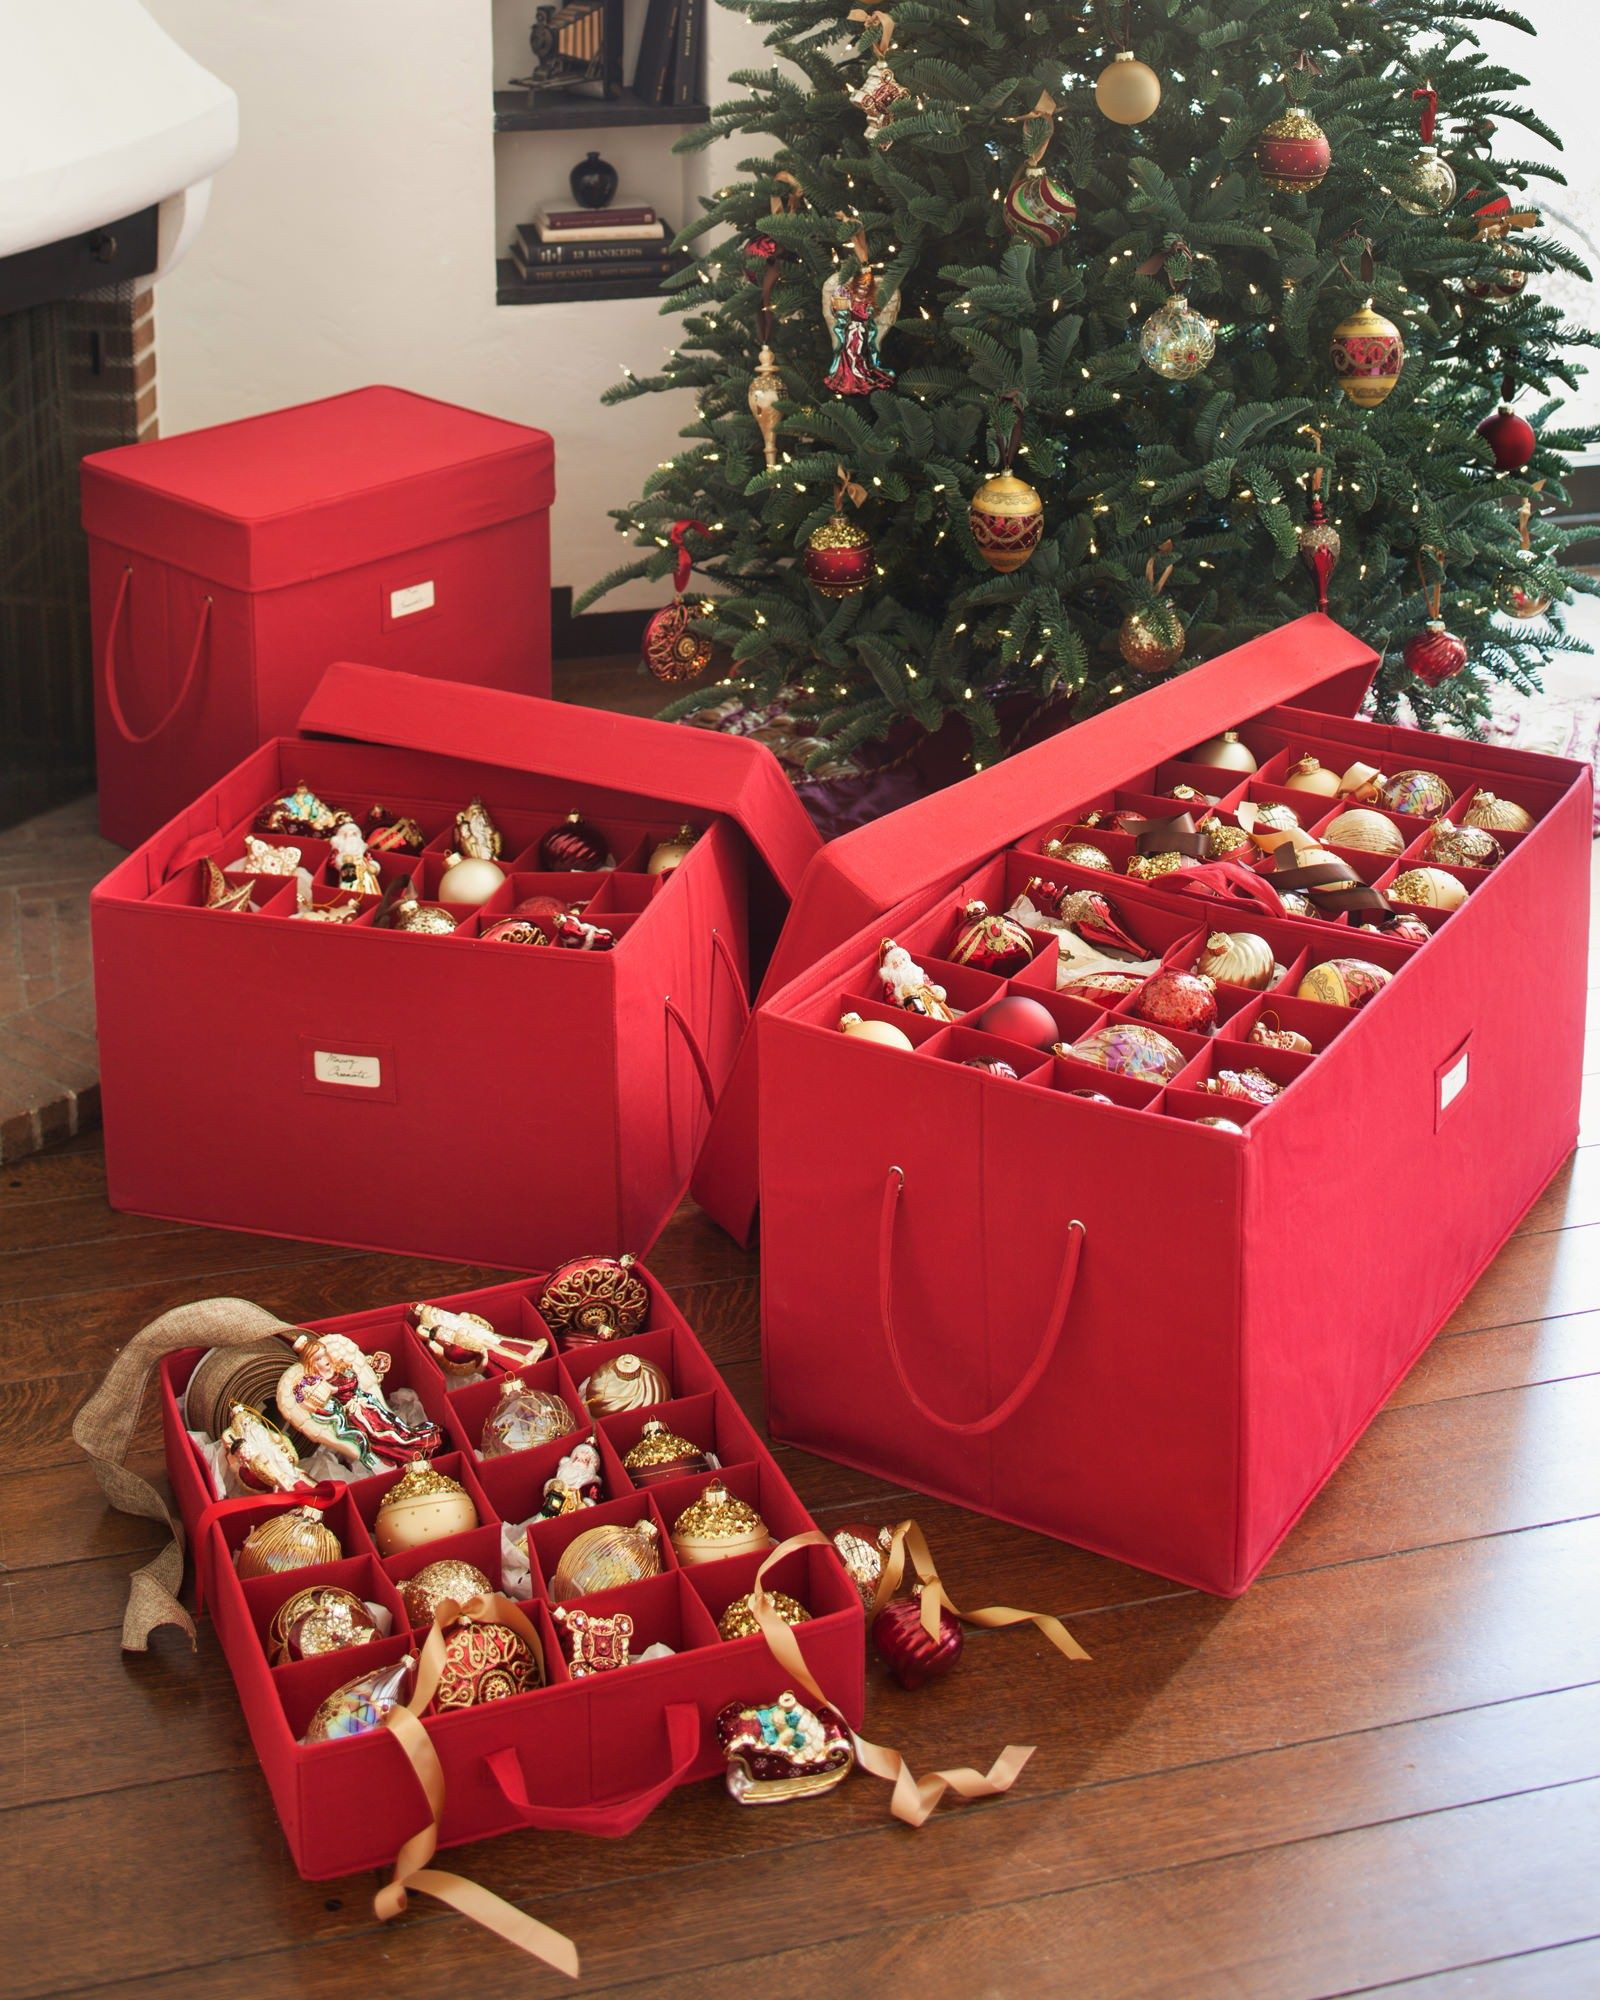 Christmas Tree Storage Box
 Cleaning up after the holidays need not be stressful With